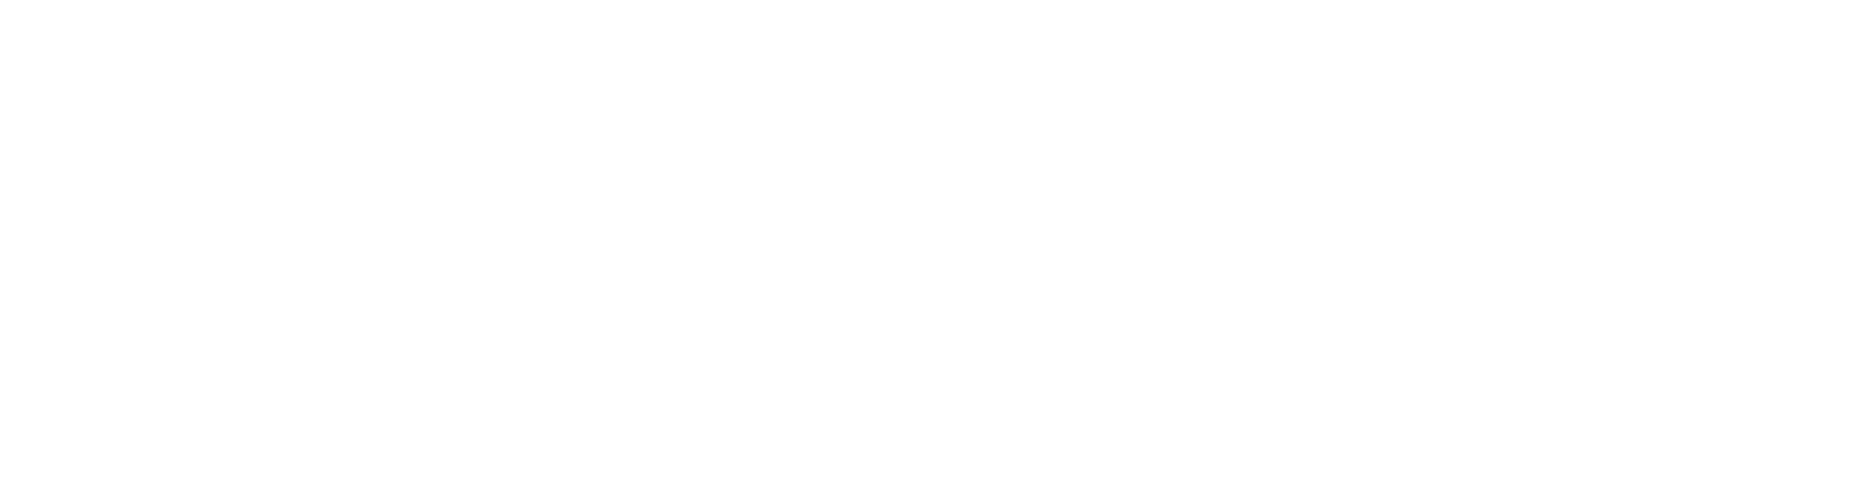 Electric Results White logo